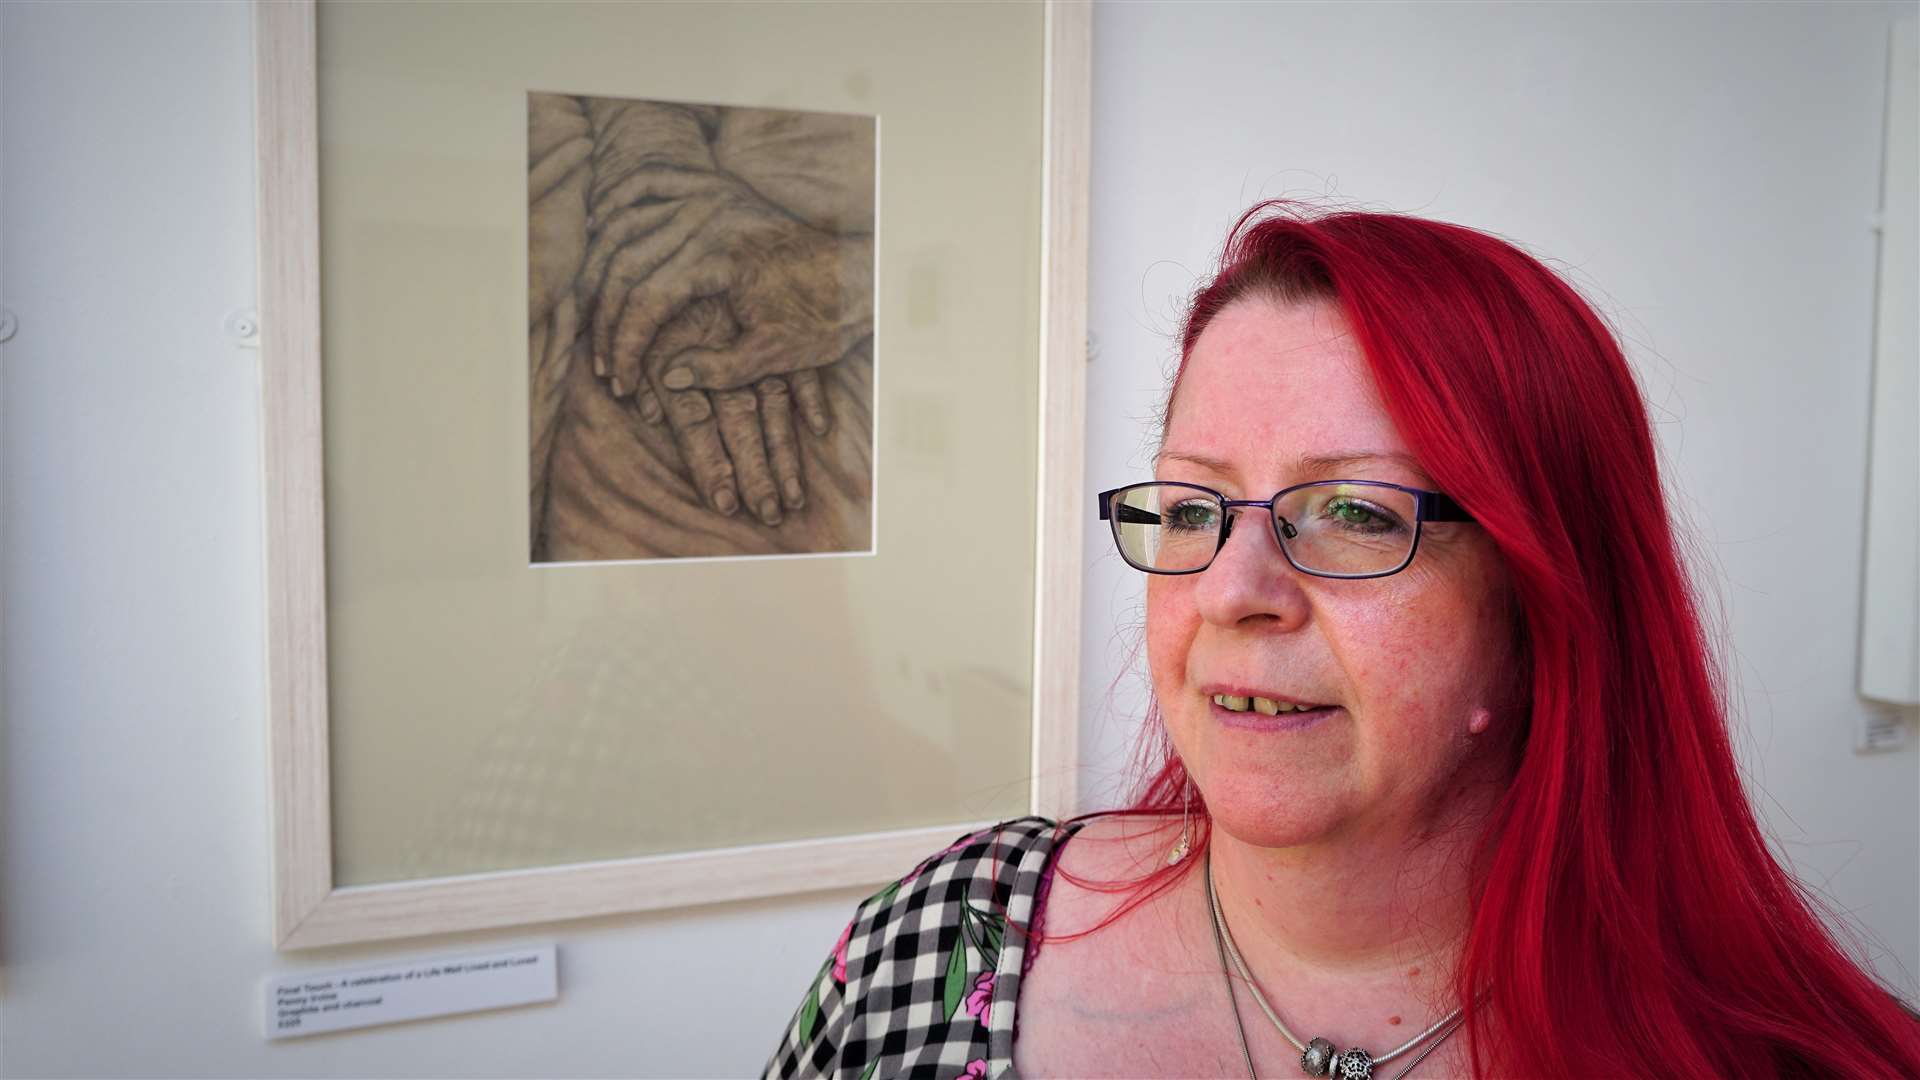 Penny Irvine with one of her graphite and charcoal artworks that can be seen in the show. Picture: DGS